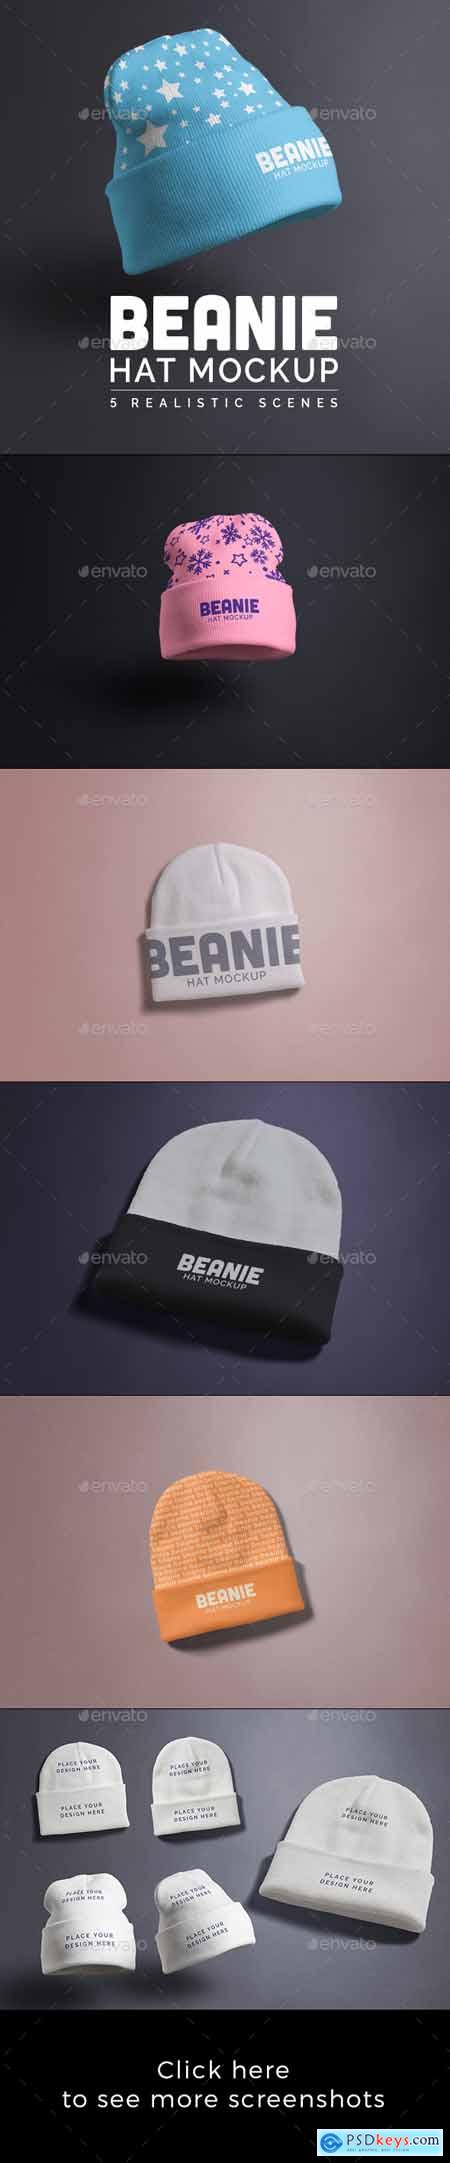 Download Graphicriver Beanie Hat Mock-up 26535603